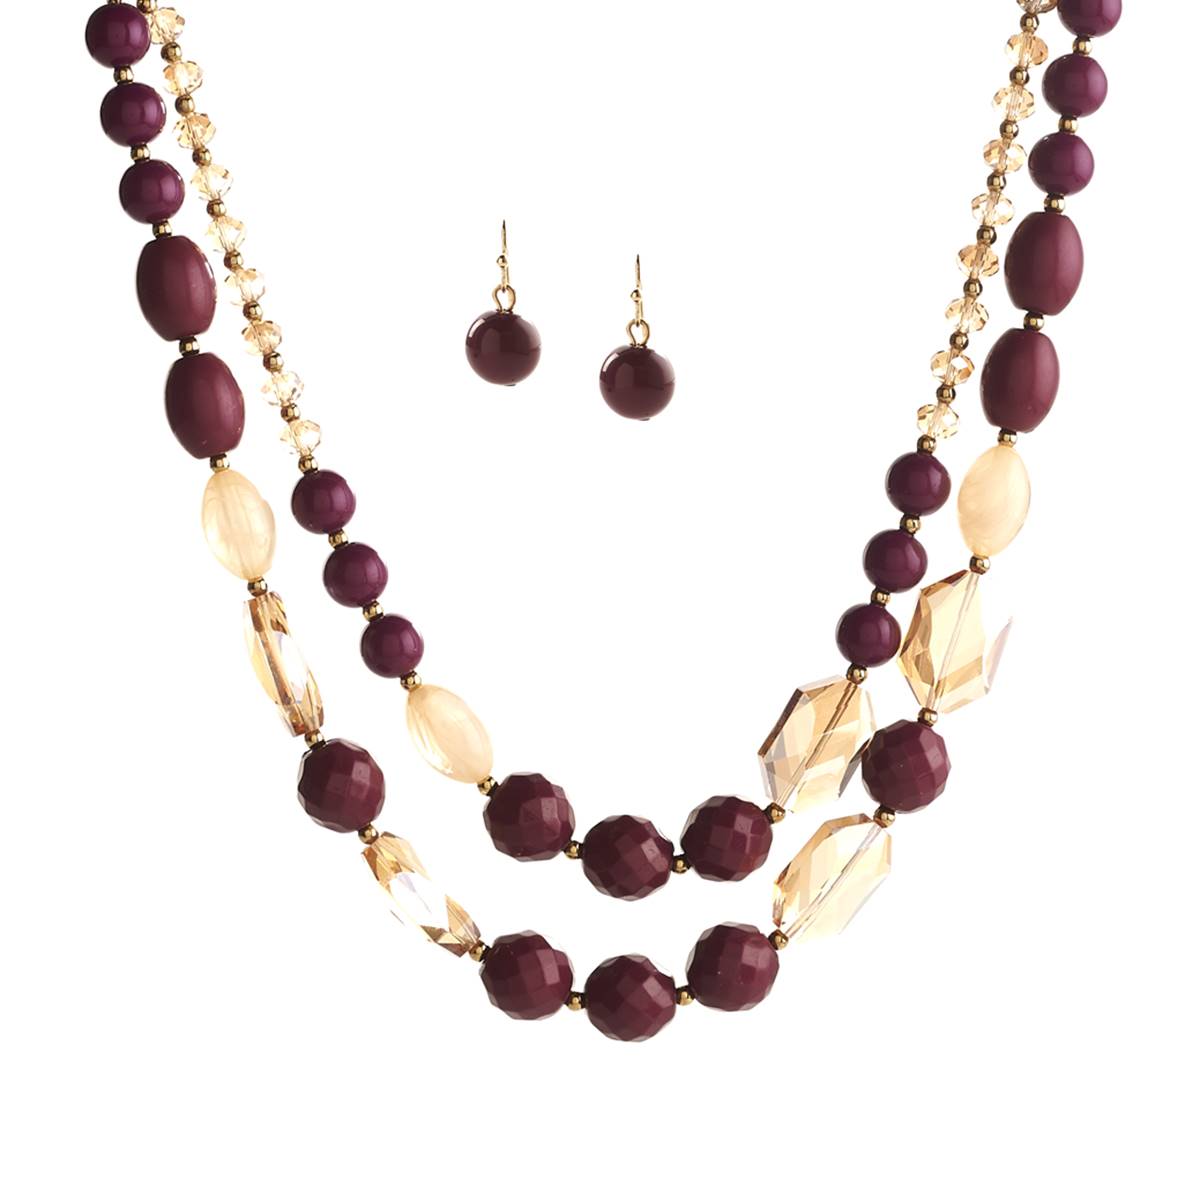 Ashley Cooper(tm) 2-Row Faceted Bead Necklace & Fishhook Earrings